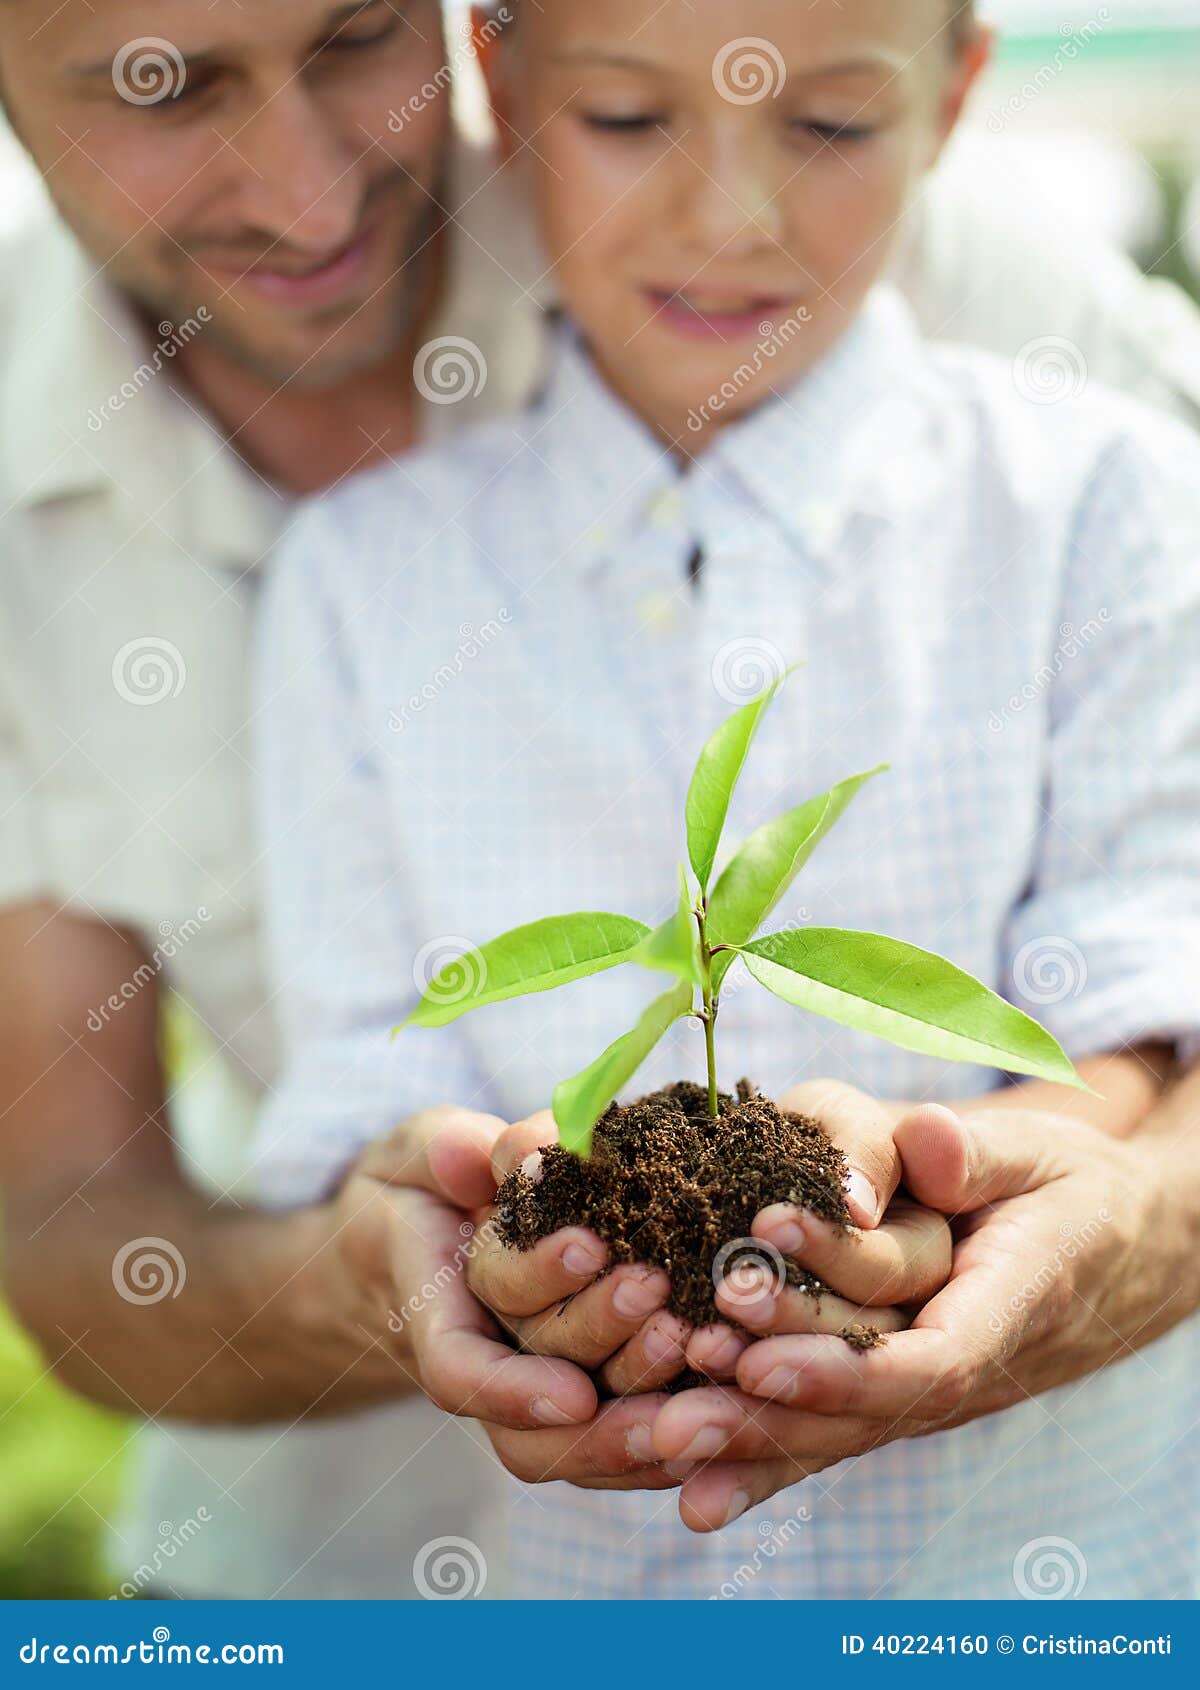 father educate son to care a plant